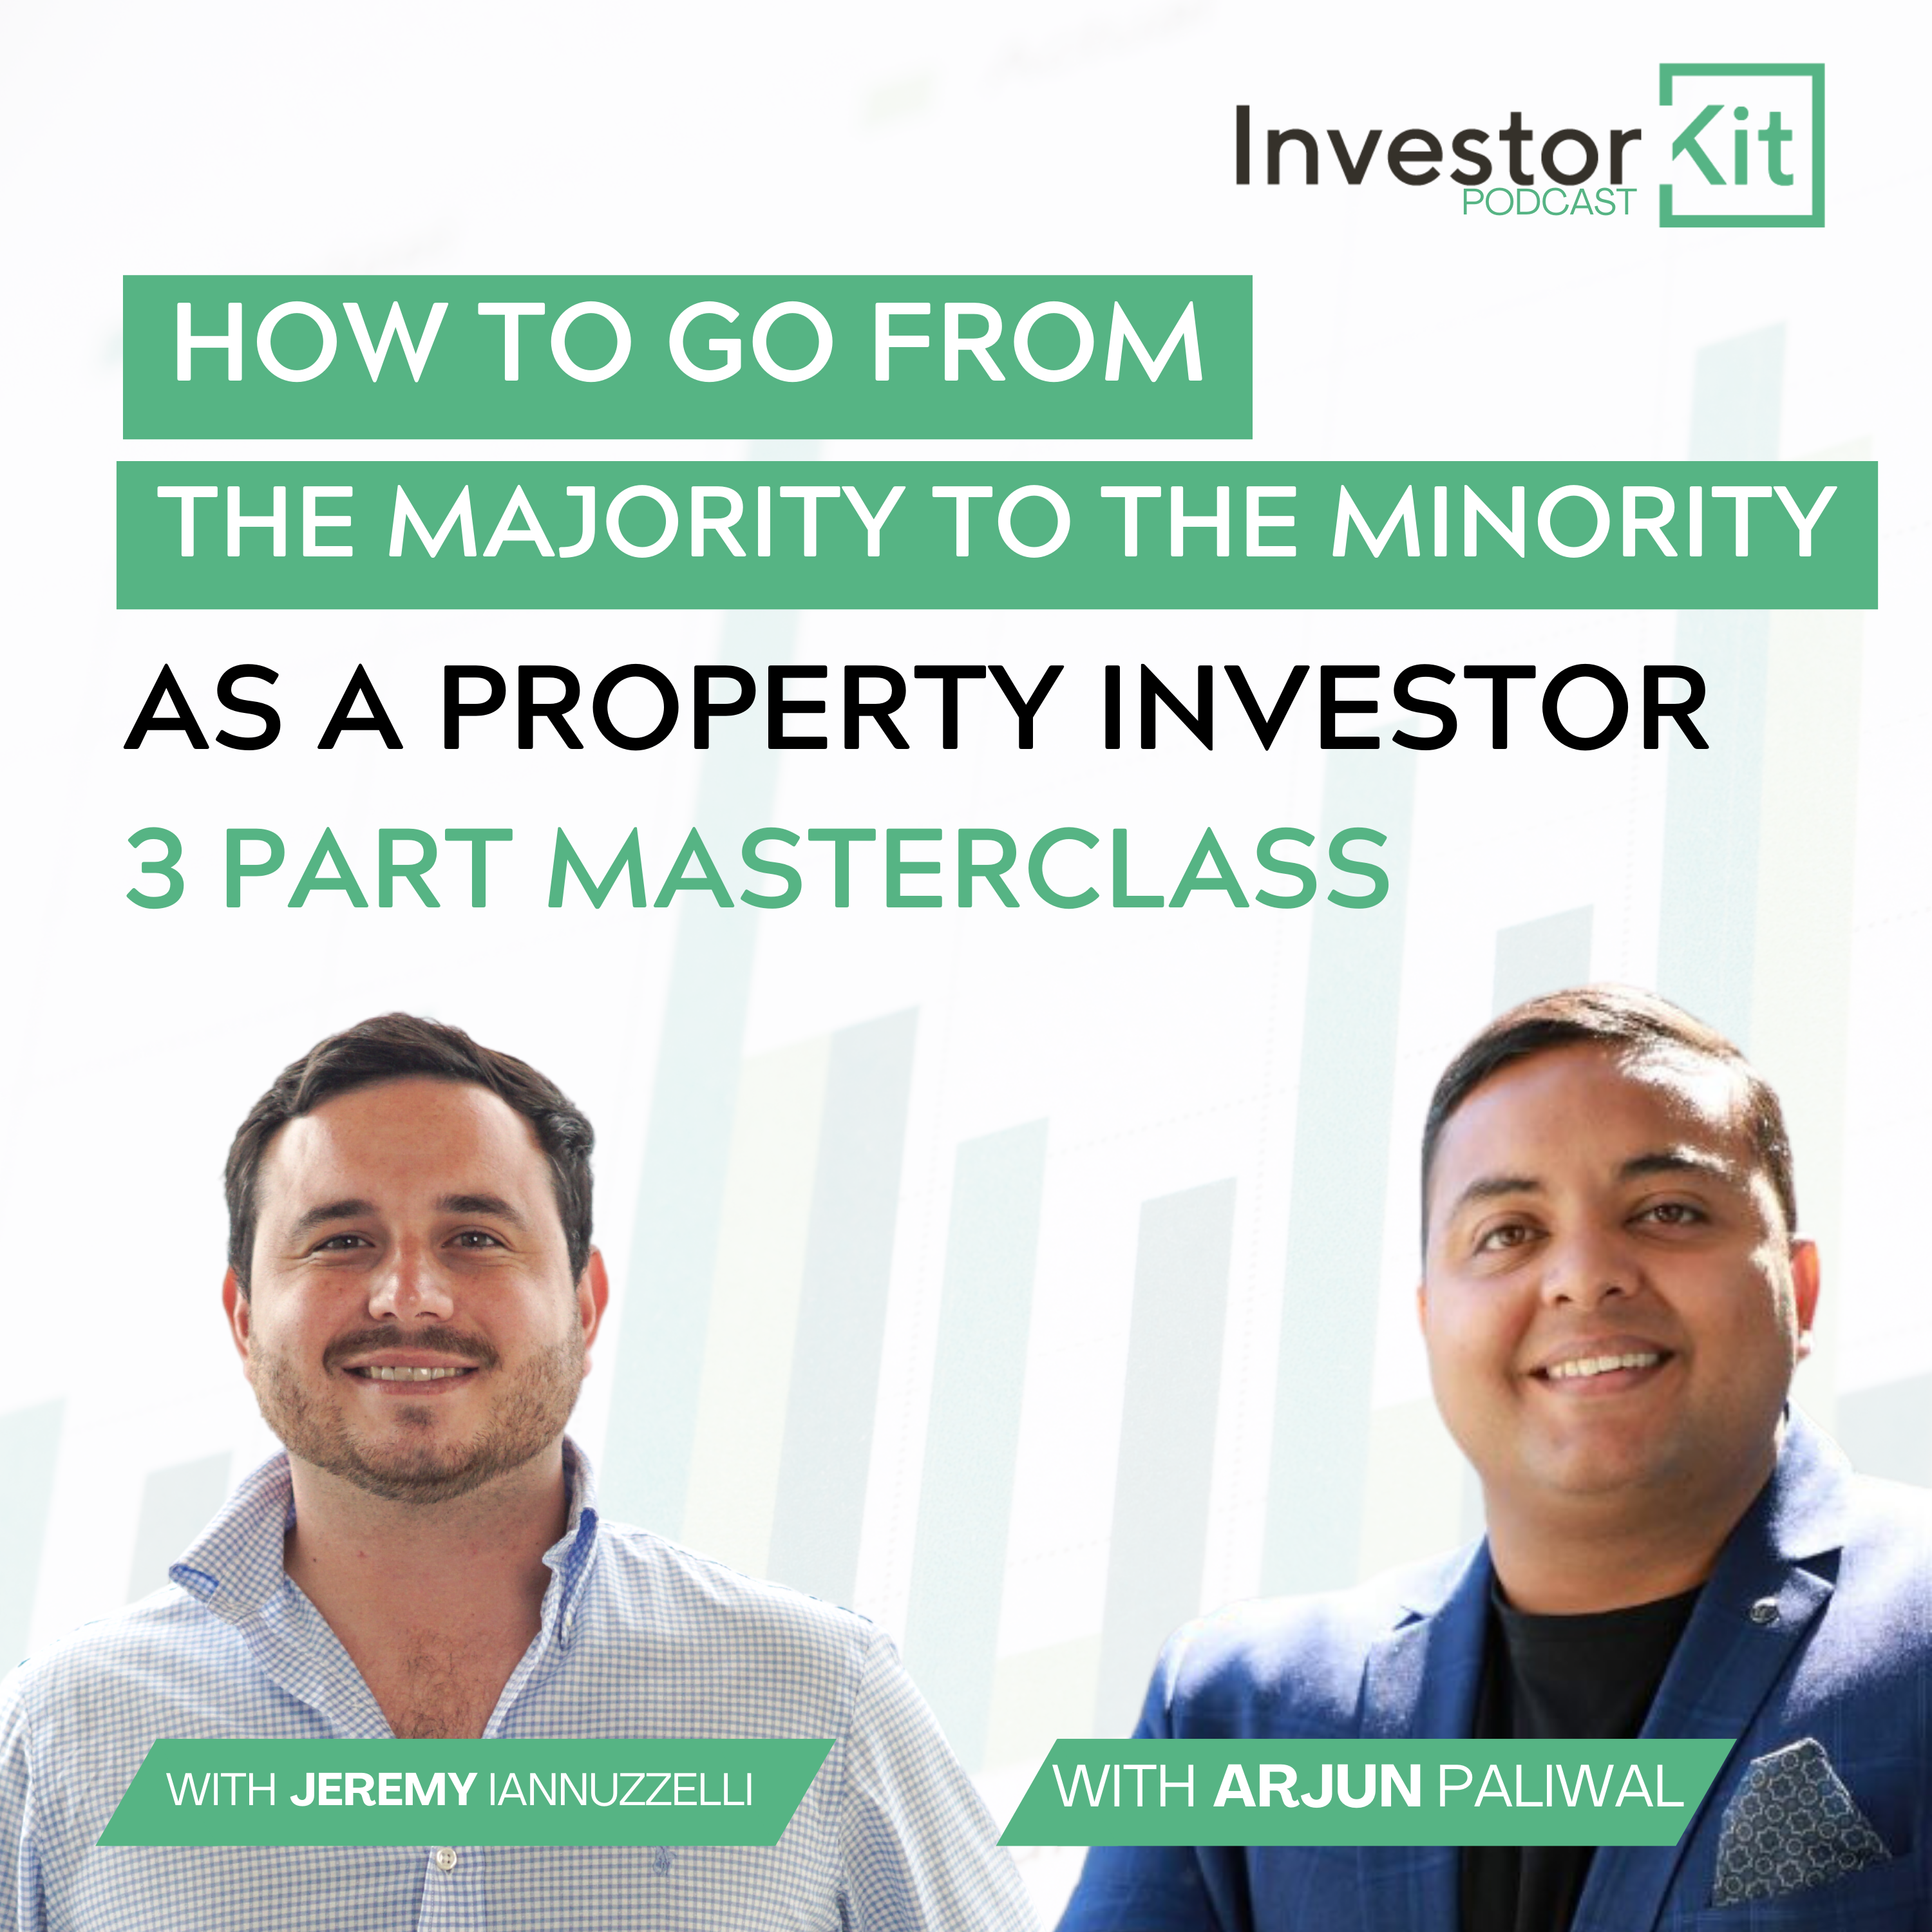 How to go from the Majority to the Minority Part 3 - With Arjun Paliwal & Jeremy Iannuzzelli